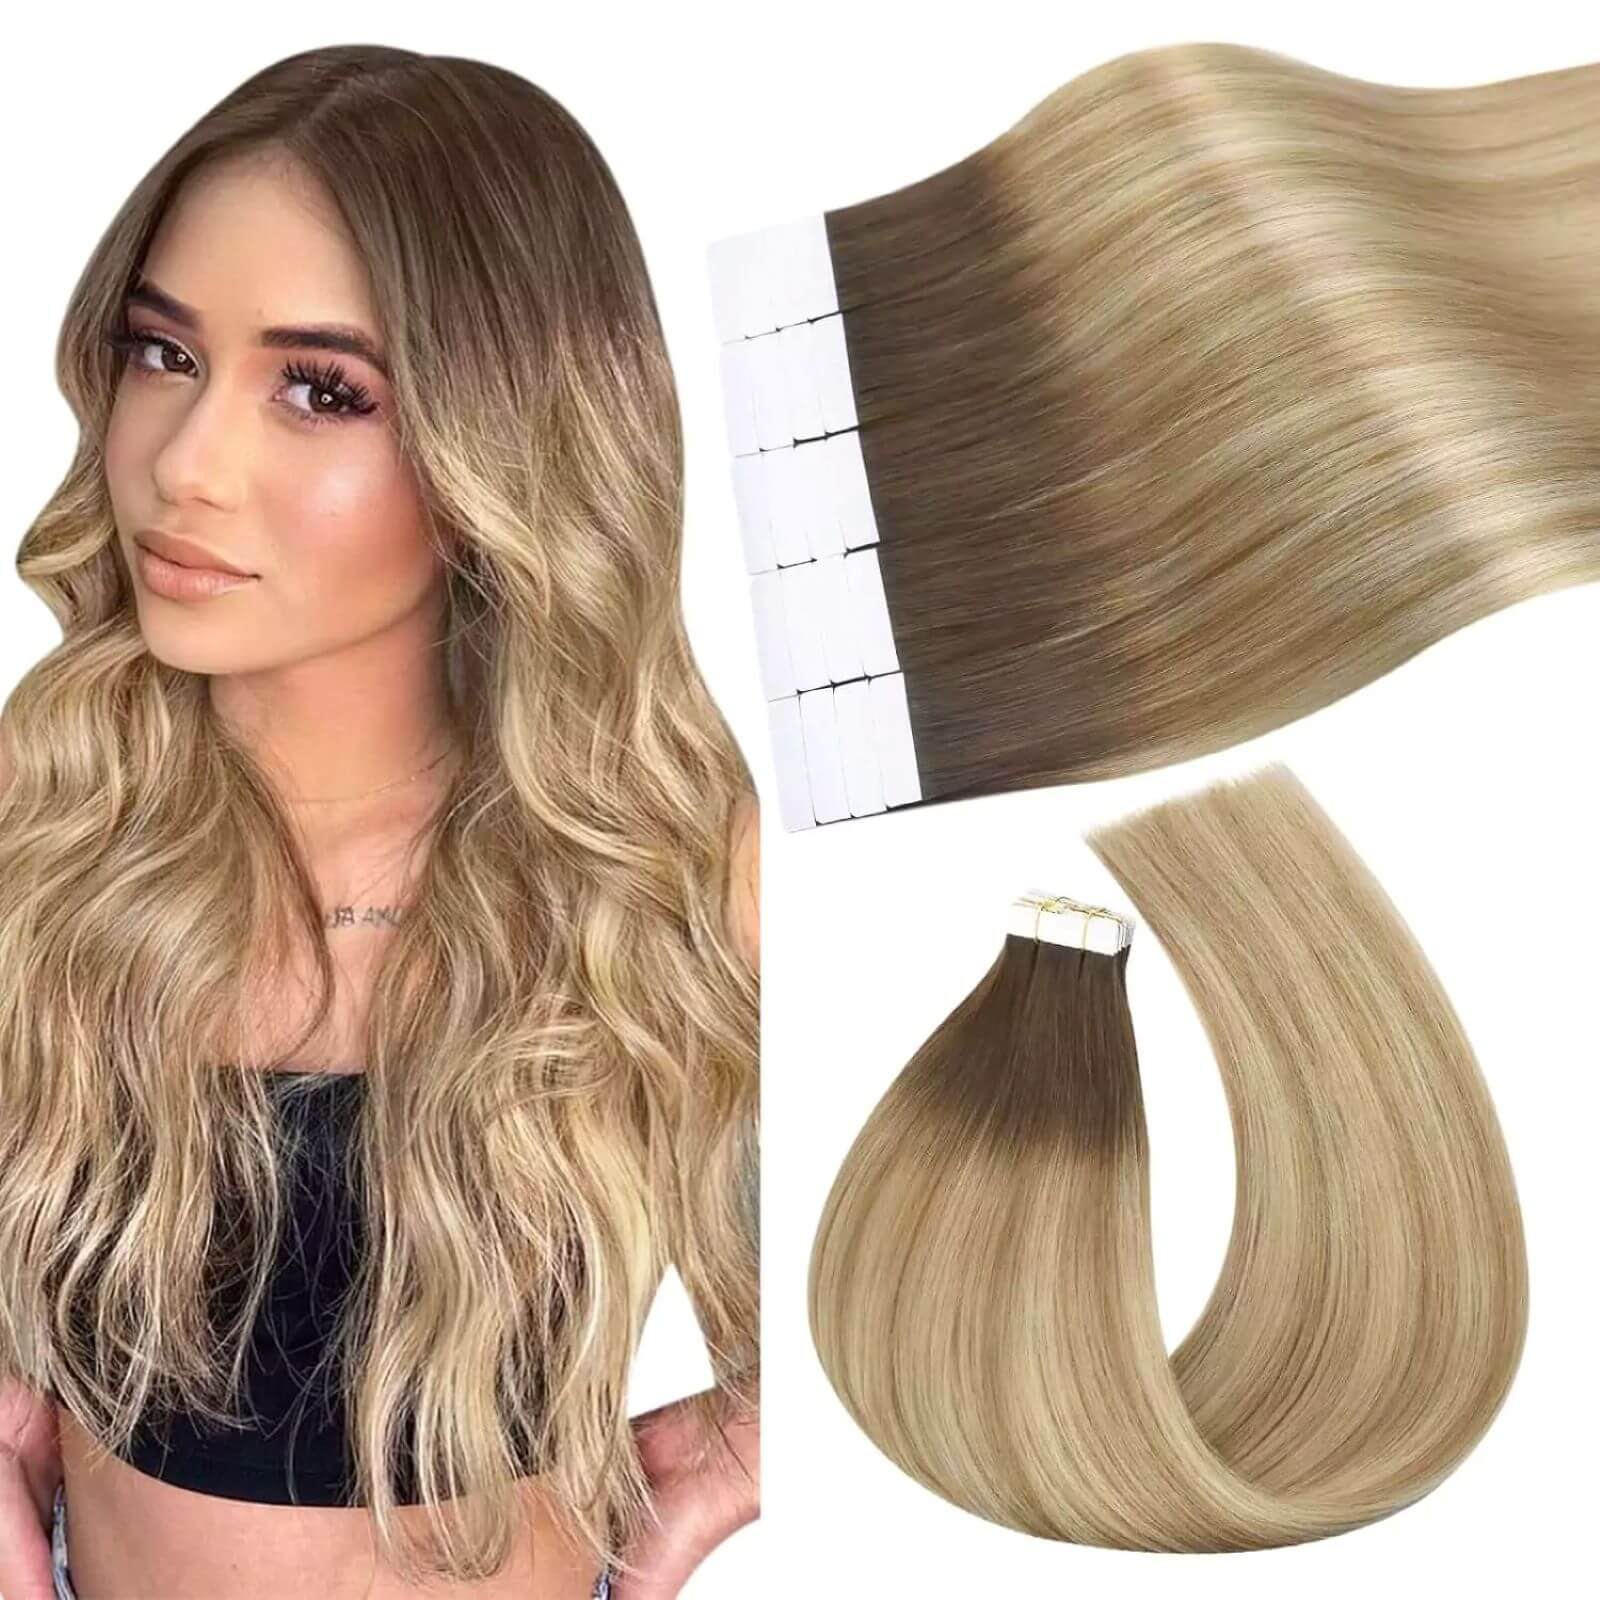 Skin Weft Tape in Human Hair Extensions Balayage Brown Blonde